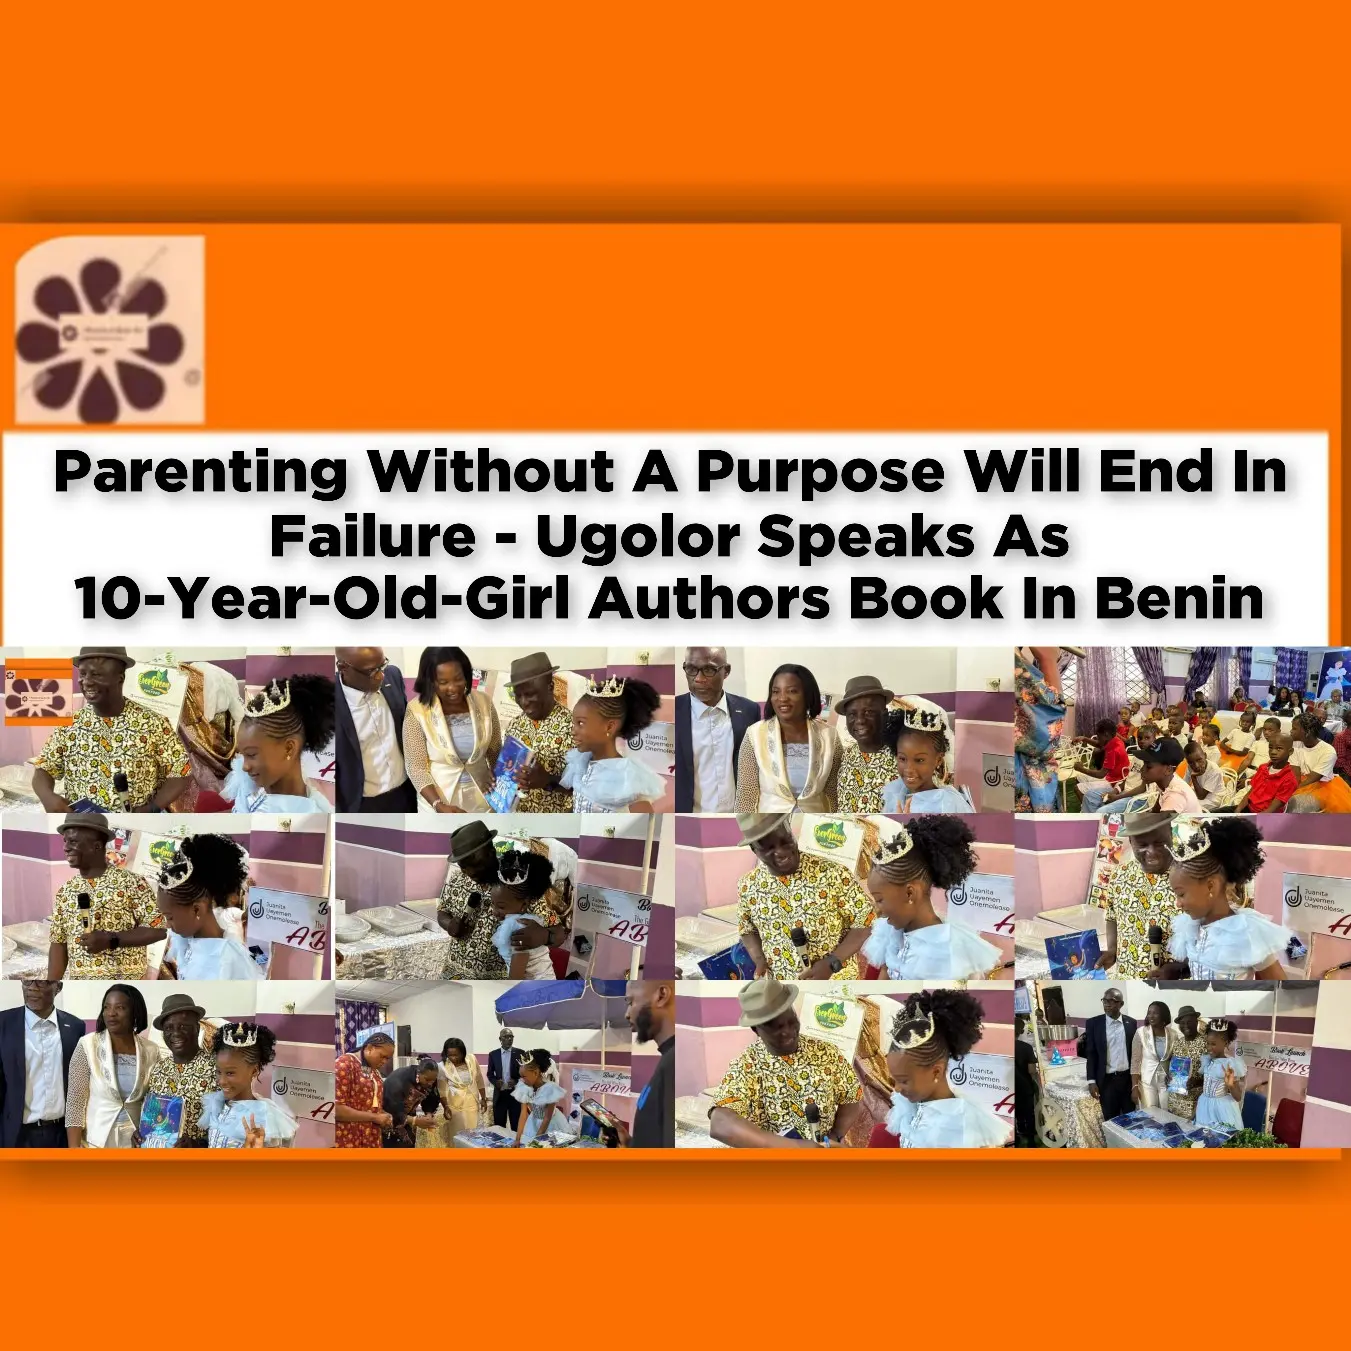 Parenting Without A Purpose Will End In Failure - Ugolor Speaks As 10-Year-Old-Girl Authors Book In Benin ~ OsazuwaAkonedo #Landlords